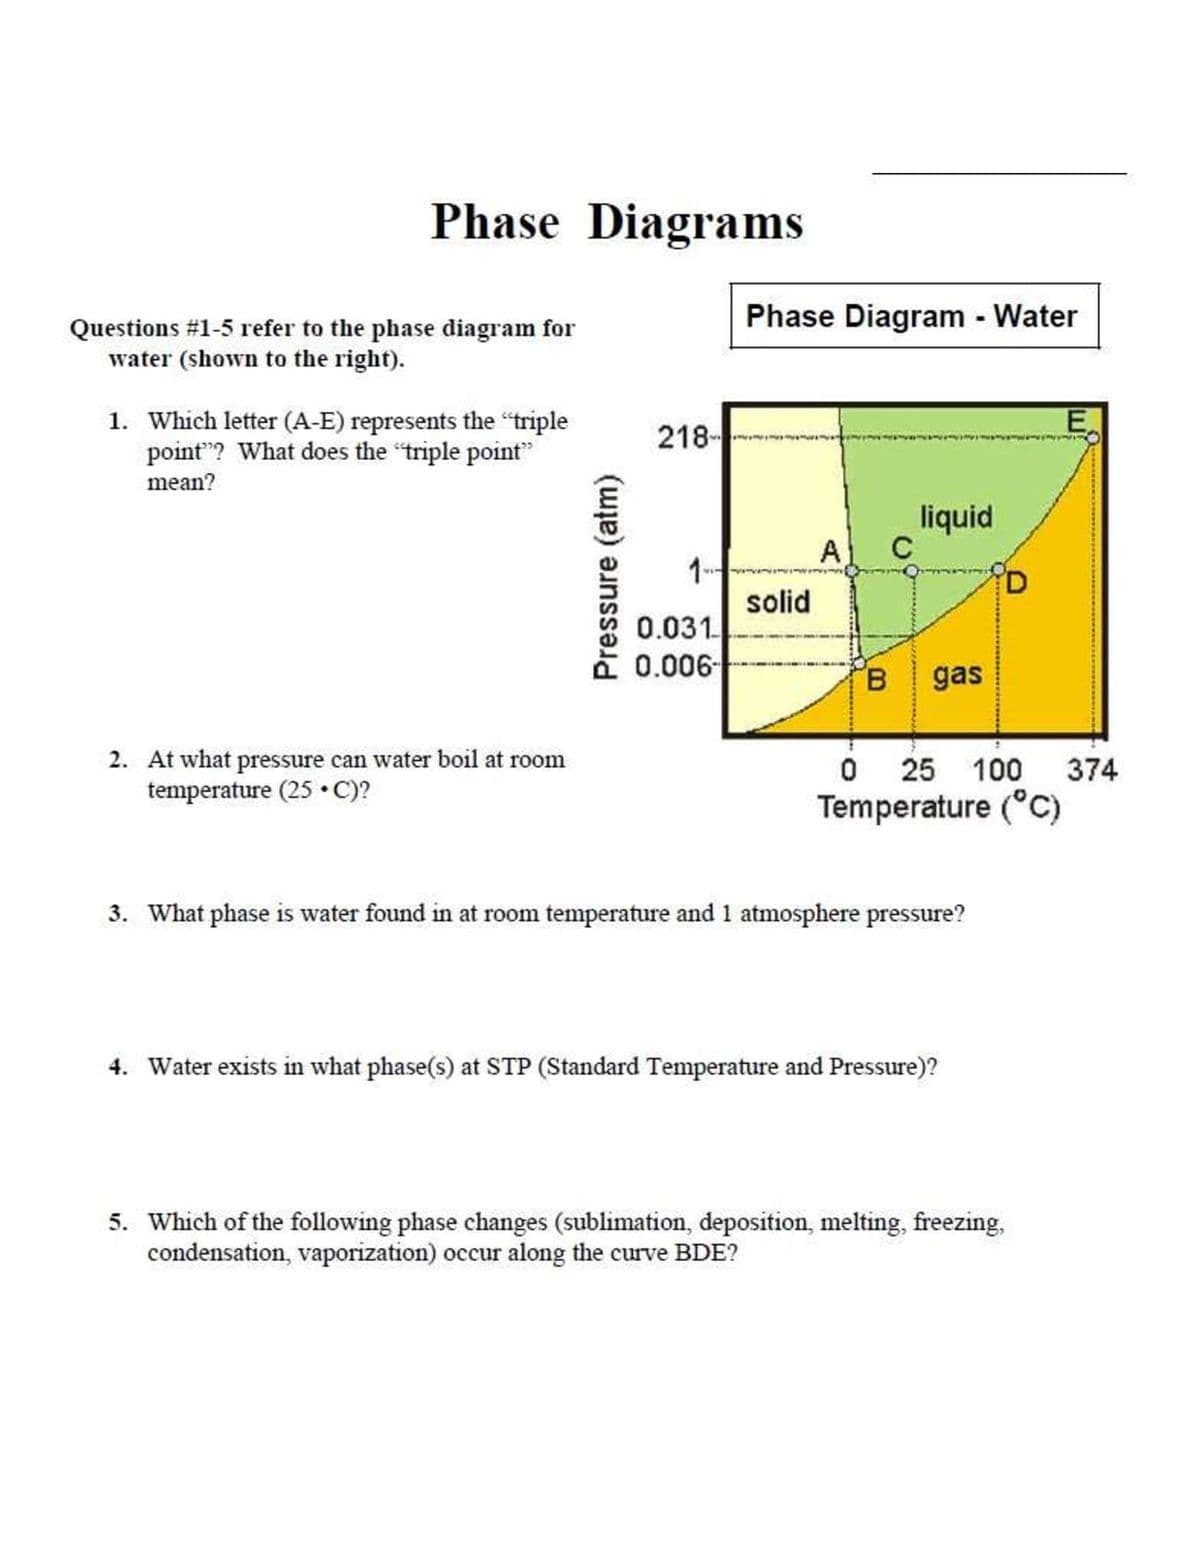 Phase Diagrams
Phase Diagram - Water
Questions #1-5 refer to the phase diagram for
water (shown to the right).
1. Which letter (A-E) represents the "triple
point"? What does the "triple point"
E,
218-
mean?
liquid
C
A
1--
solid
0.031.
0.006-
B.
gas
2. At what pressure can water boil at room
temperature (25 • C)?
25 100
374
Temperature (°C)
3. What phase is water found in at room temperature and 1 atmosphere pressure?
4. Water exists in what phase(s) at STP (Standard Temperature and Pressure)?
5. Which of the following phase changes (sublimation, deposition, melting, freezing,
condensation, vaporization) occur along the curve BDE?
Pressure (atm)
